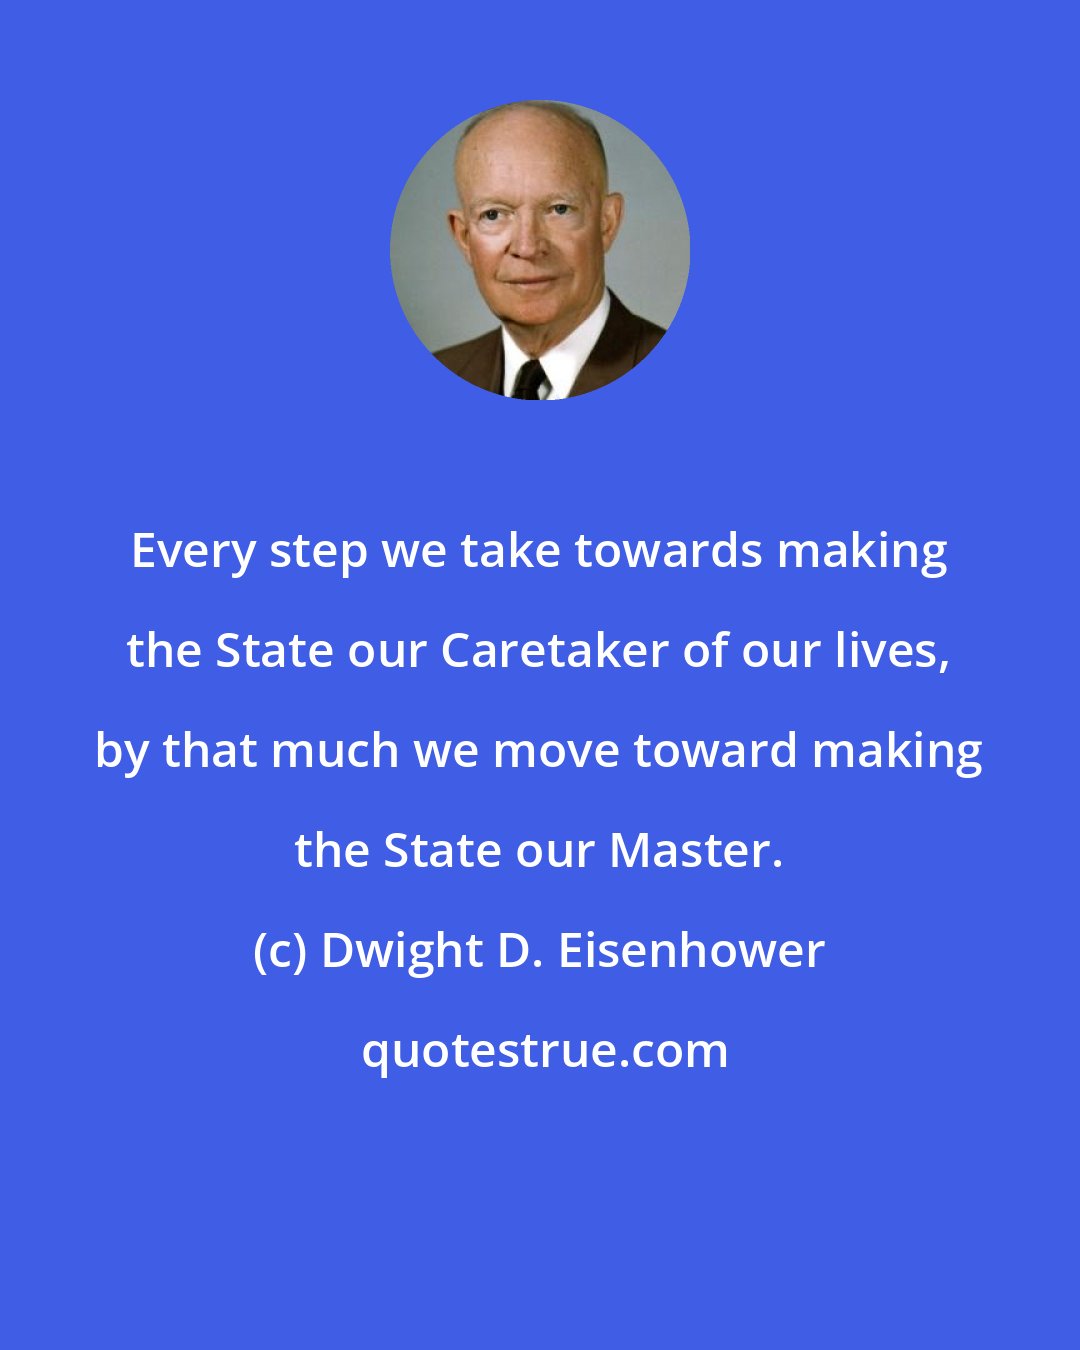 Dwight D. Eisenhower: Every step we take towards making the State our Caretaker of our lives, by that much we move toward making the State our Master.